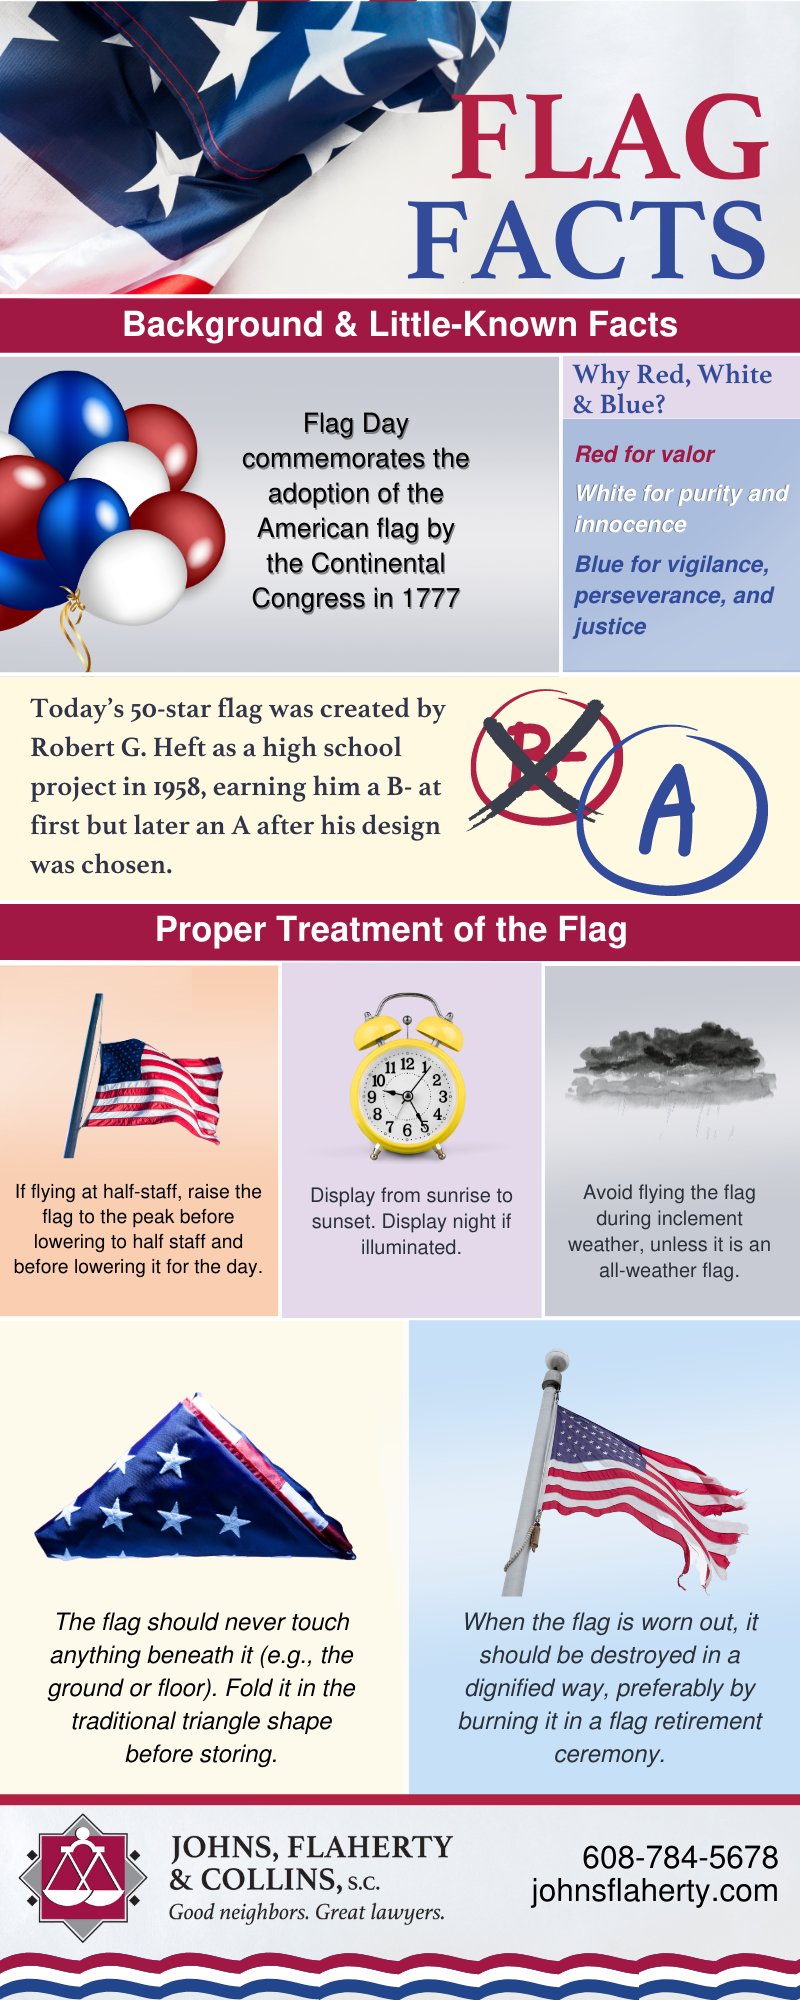 Flag facts infographic